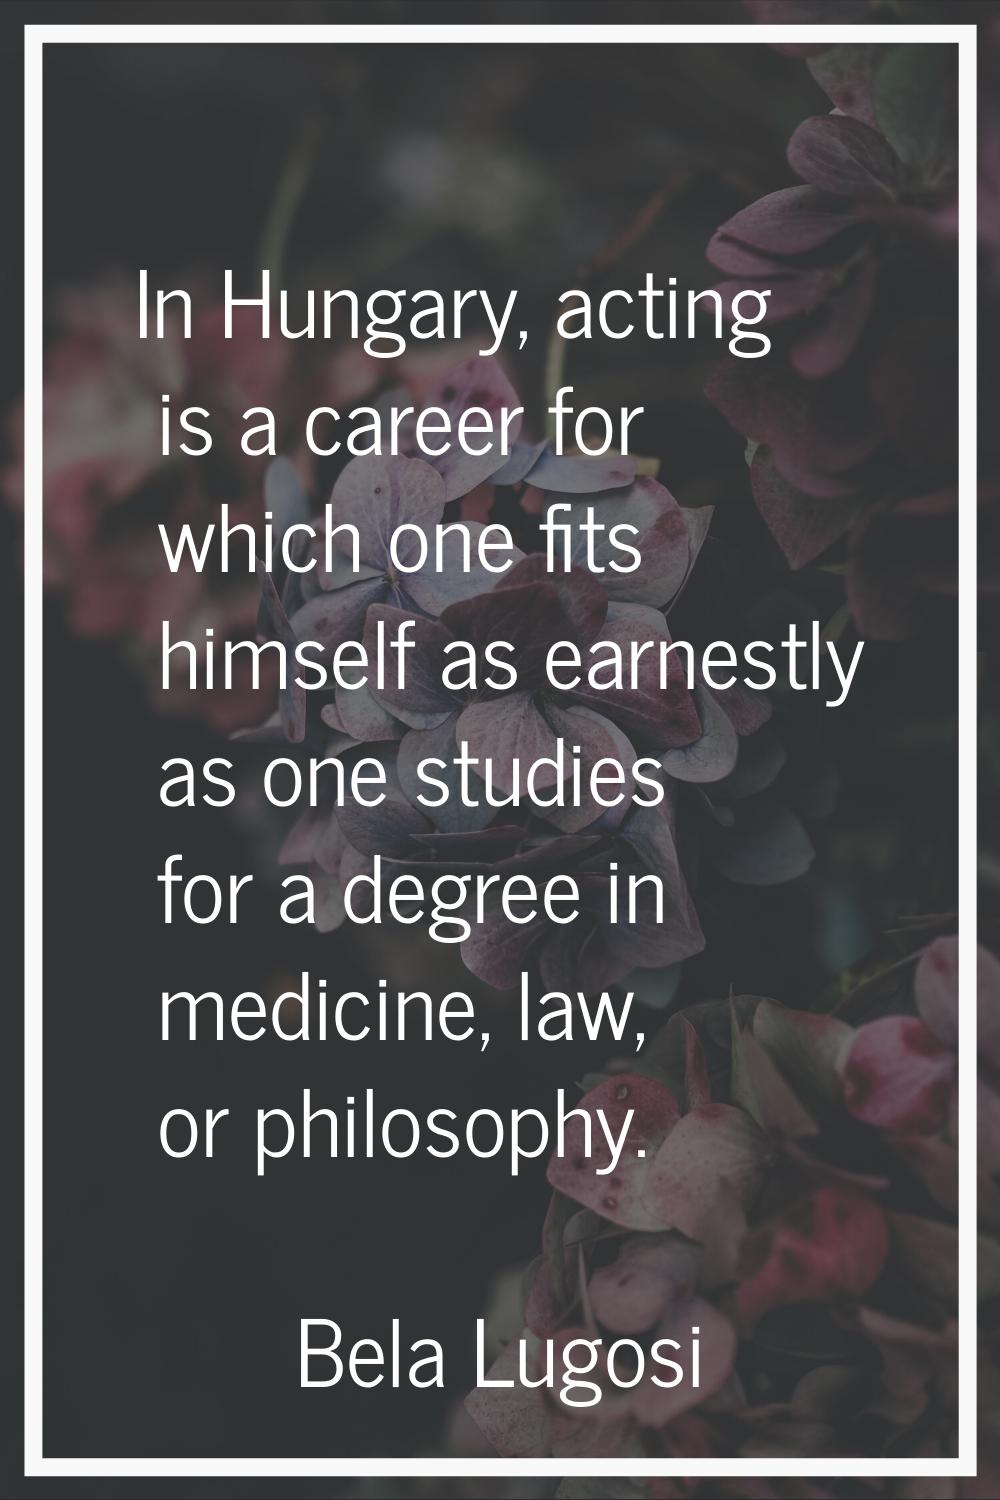 In Hungary, acting is a career for which one fits himself as earnestly as one studies for a degree 